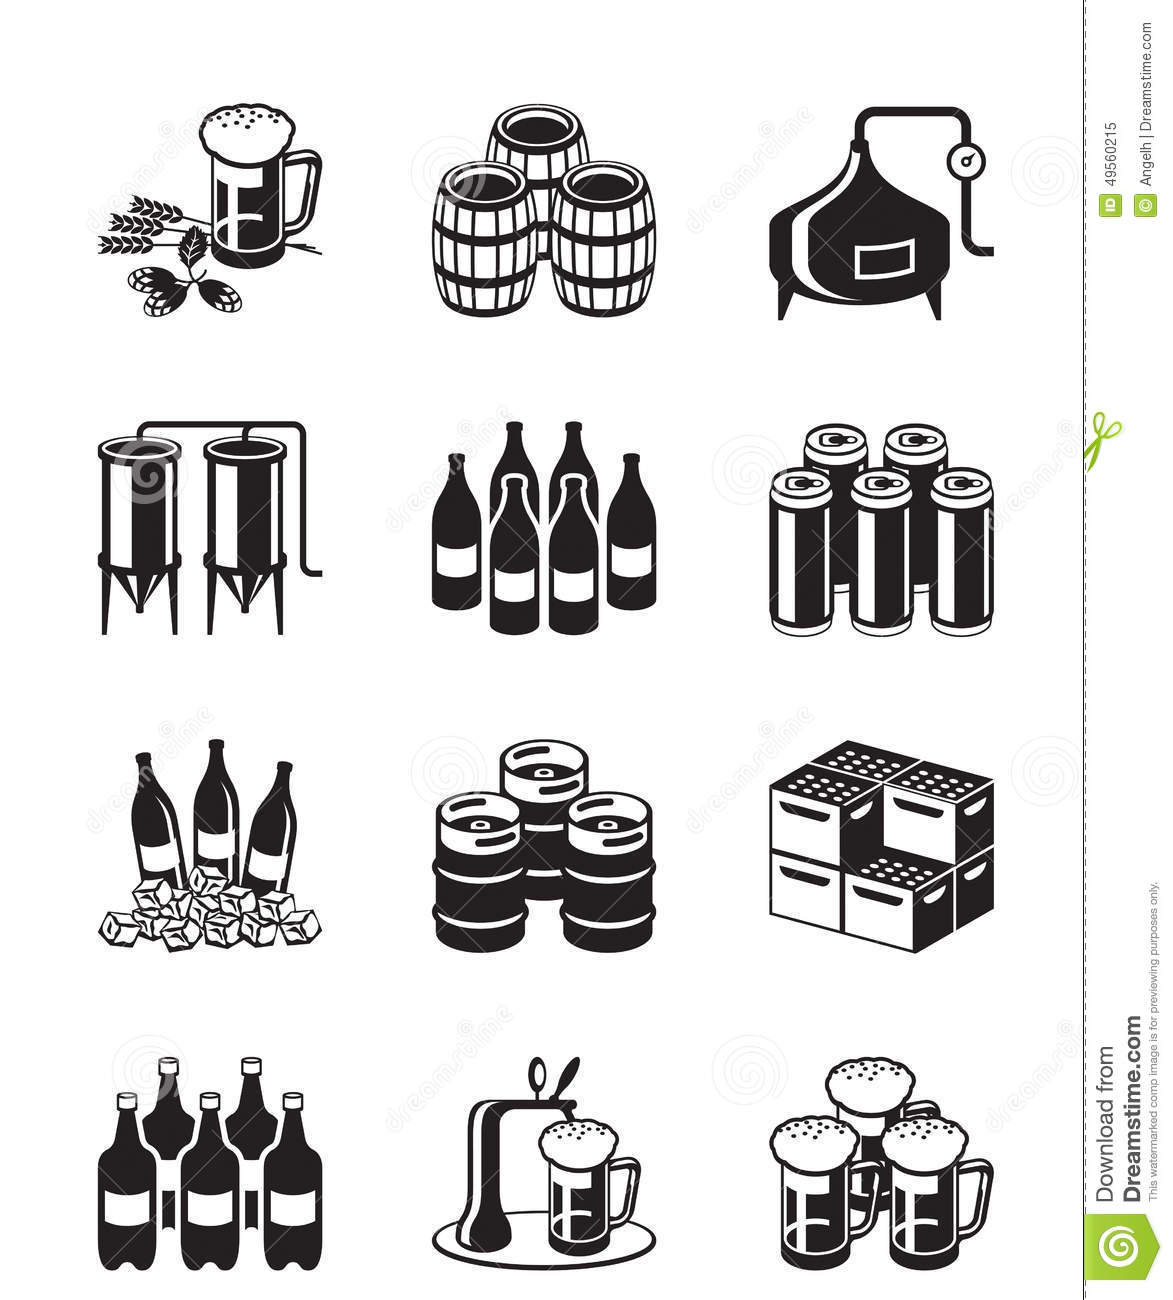 Wooden beer keg icon eps vector - Search Clip Art, Illustration 